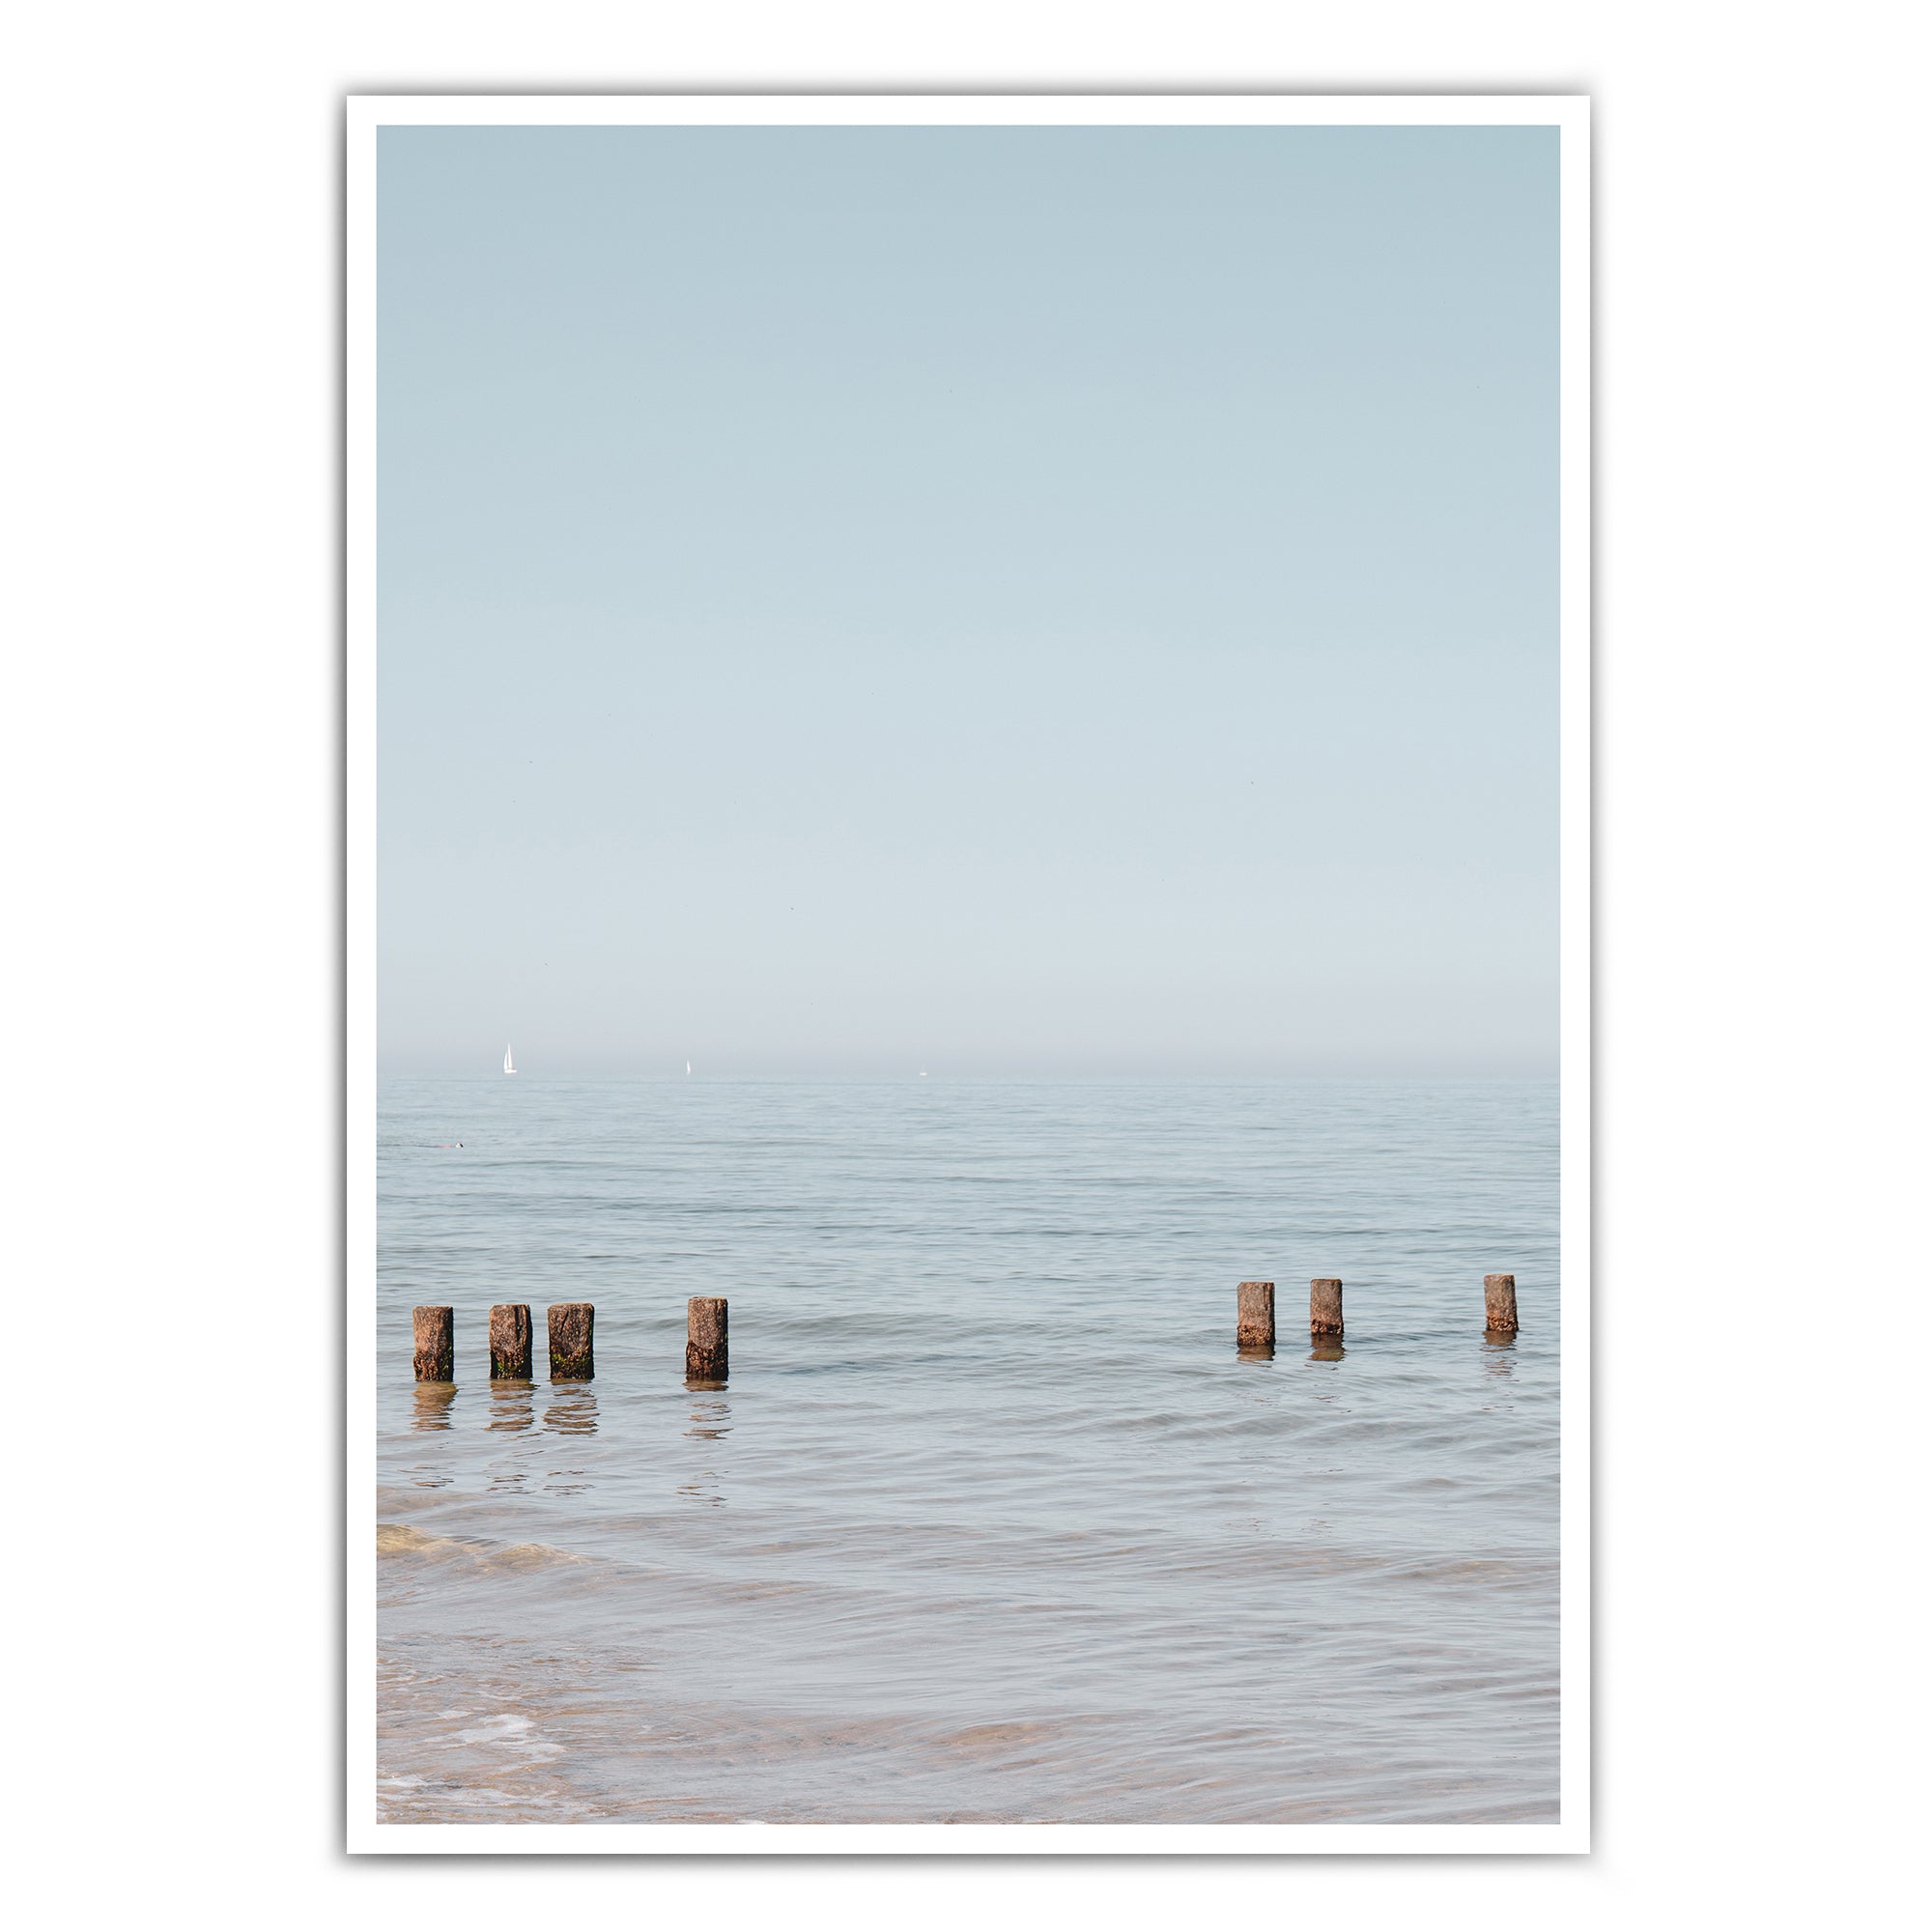 4one_pictures_ostsee_strand_meer_boot_ocean_skandi_poster_natur_hell_bild_a4_a3_4one.jpg